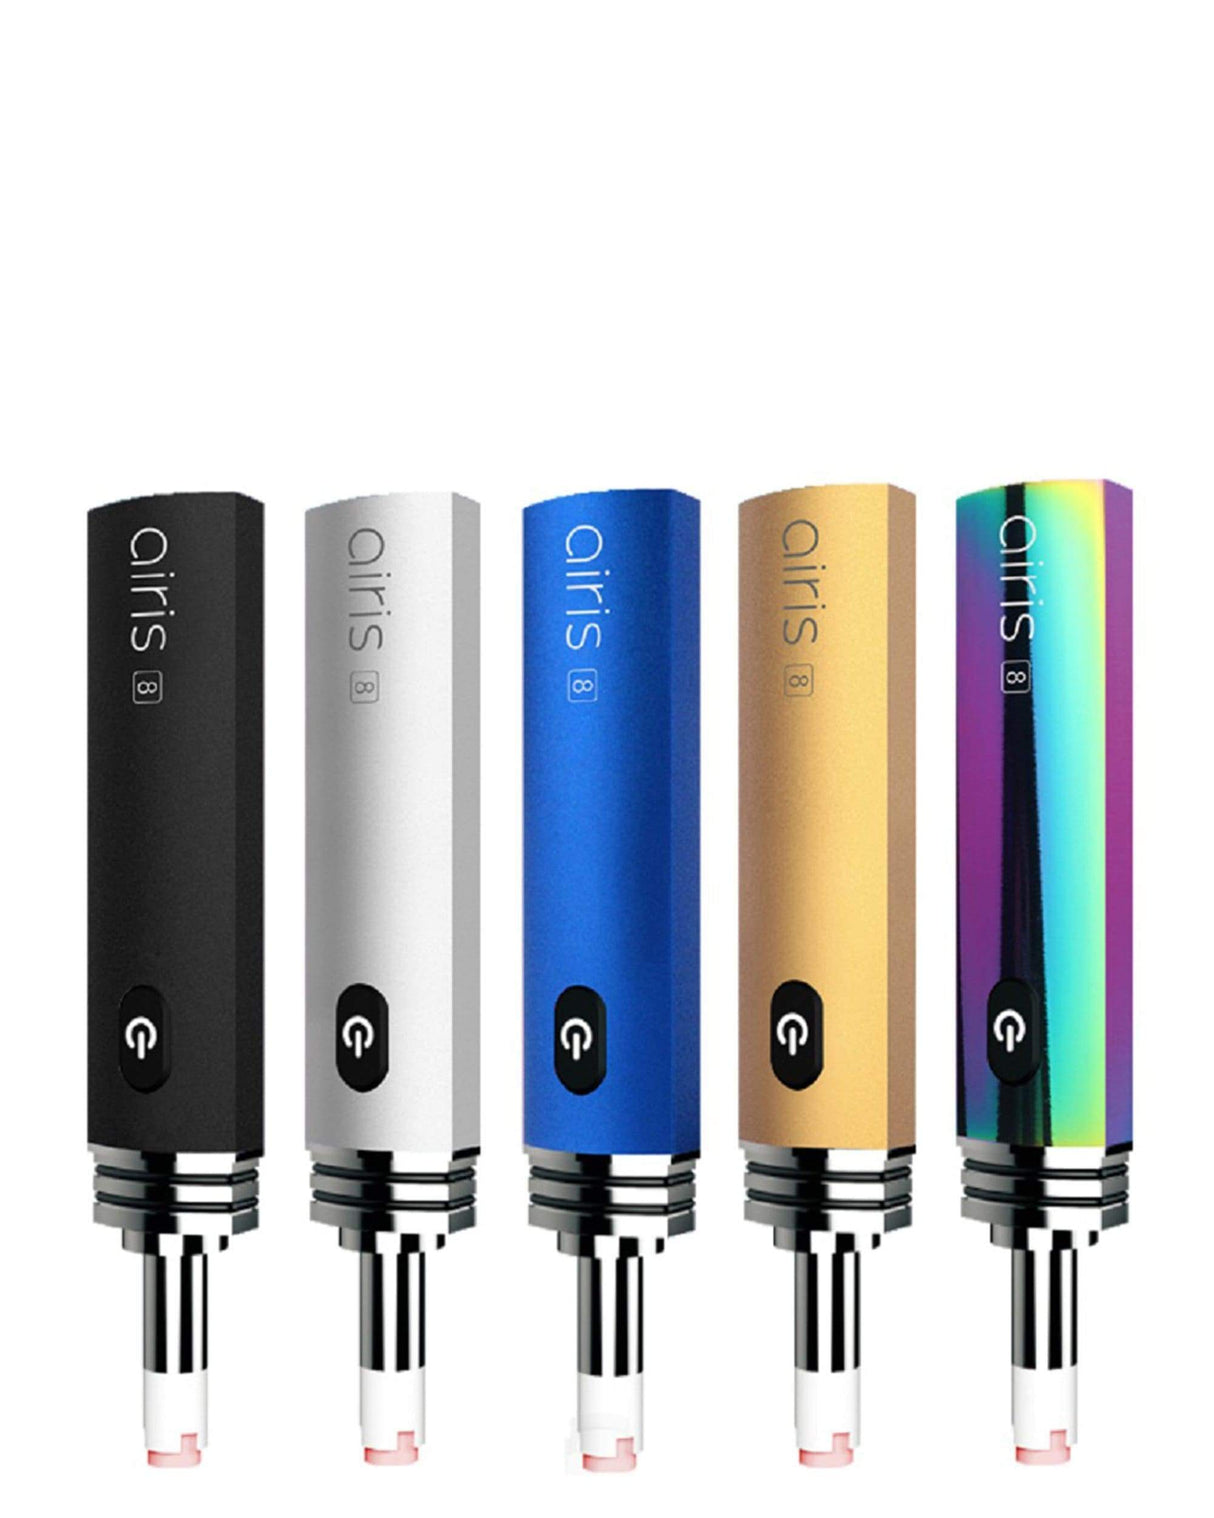 Airistech Airis 8 Dip N Dab vaporizers in black, silver, gold, blue, rainbow colors front view